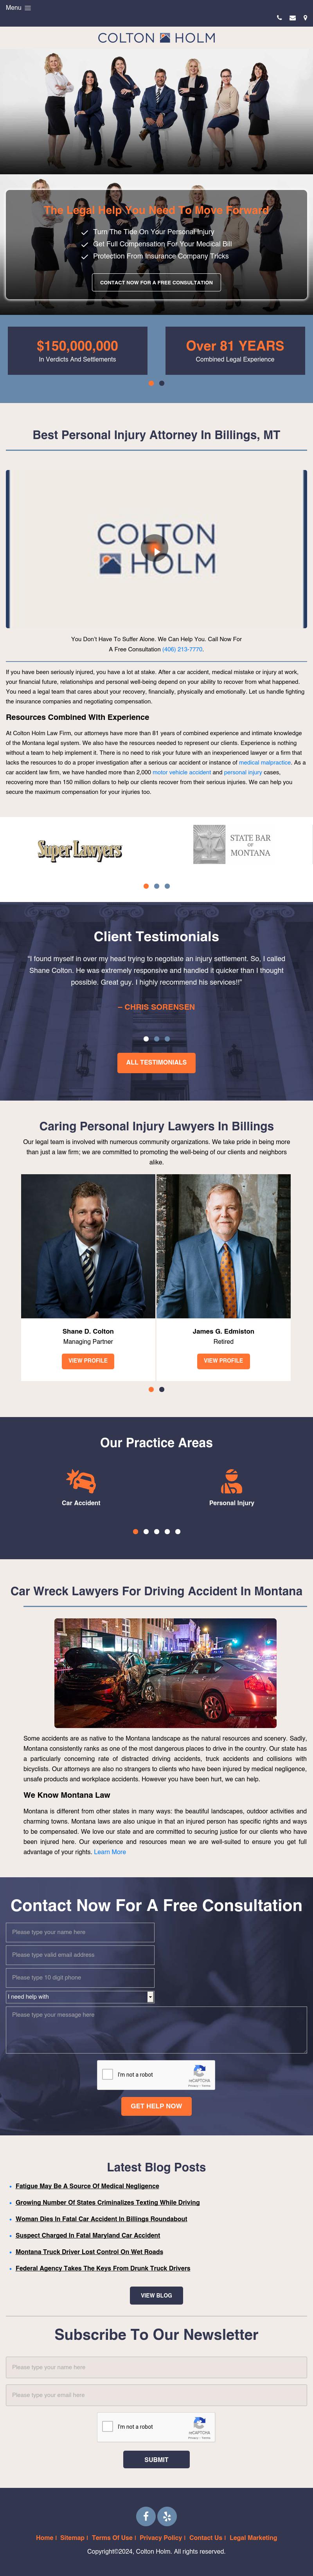 Law Firm of Edmiston & Colton - Billings MT Lawyers